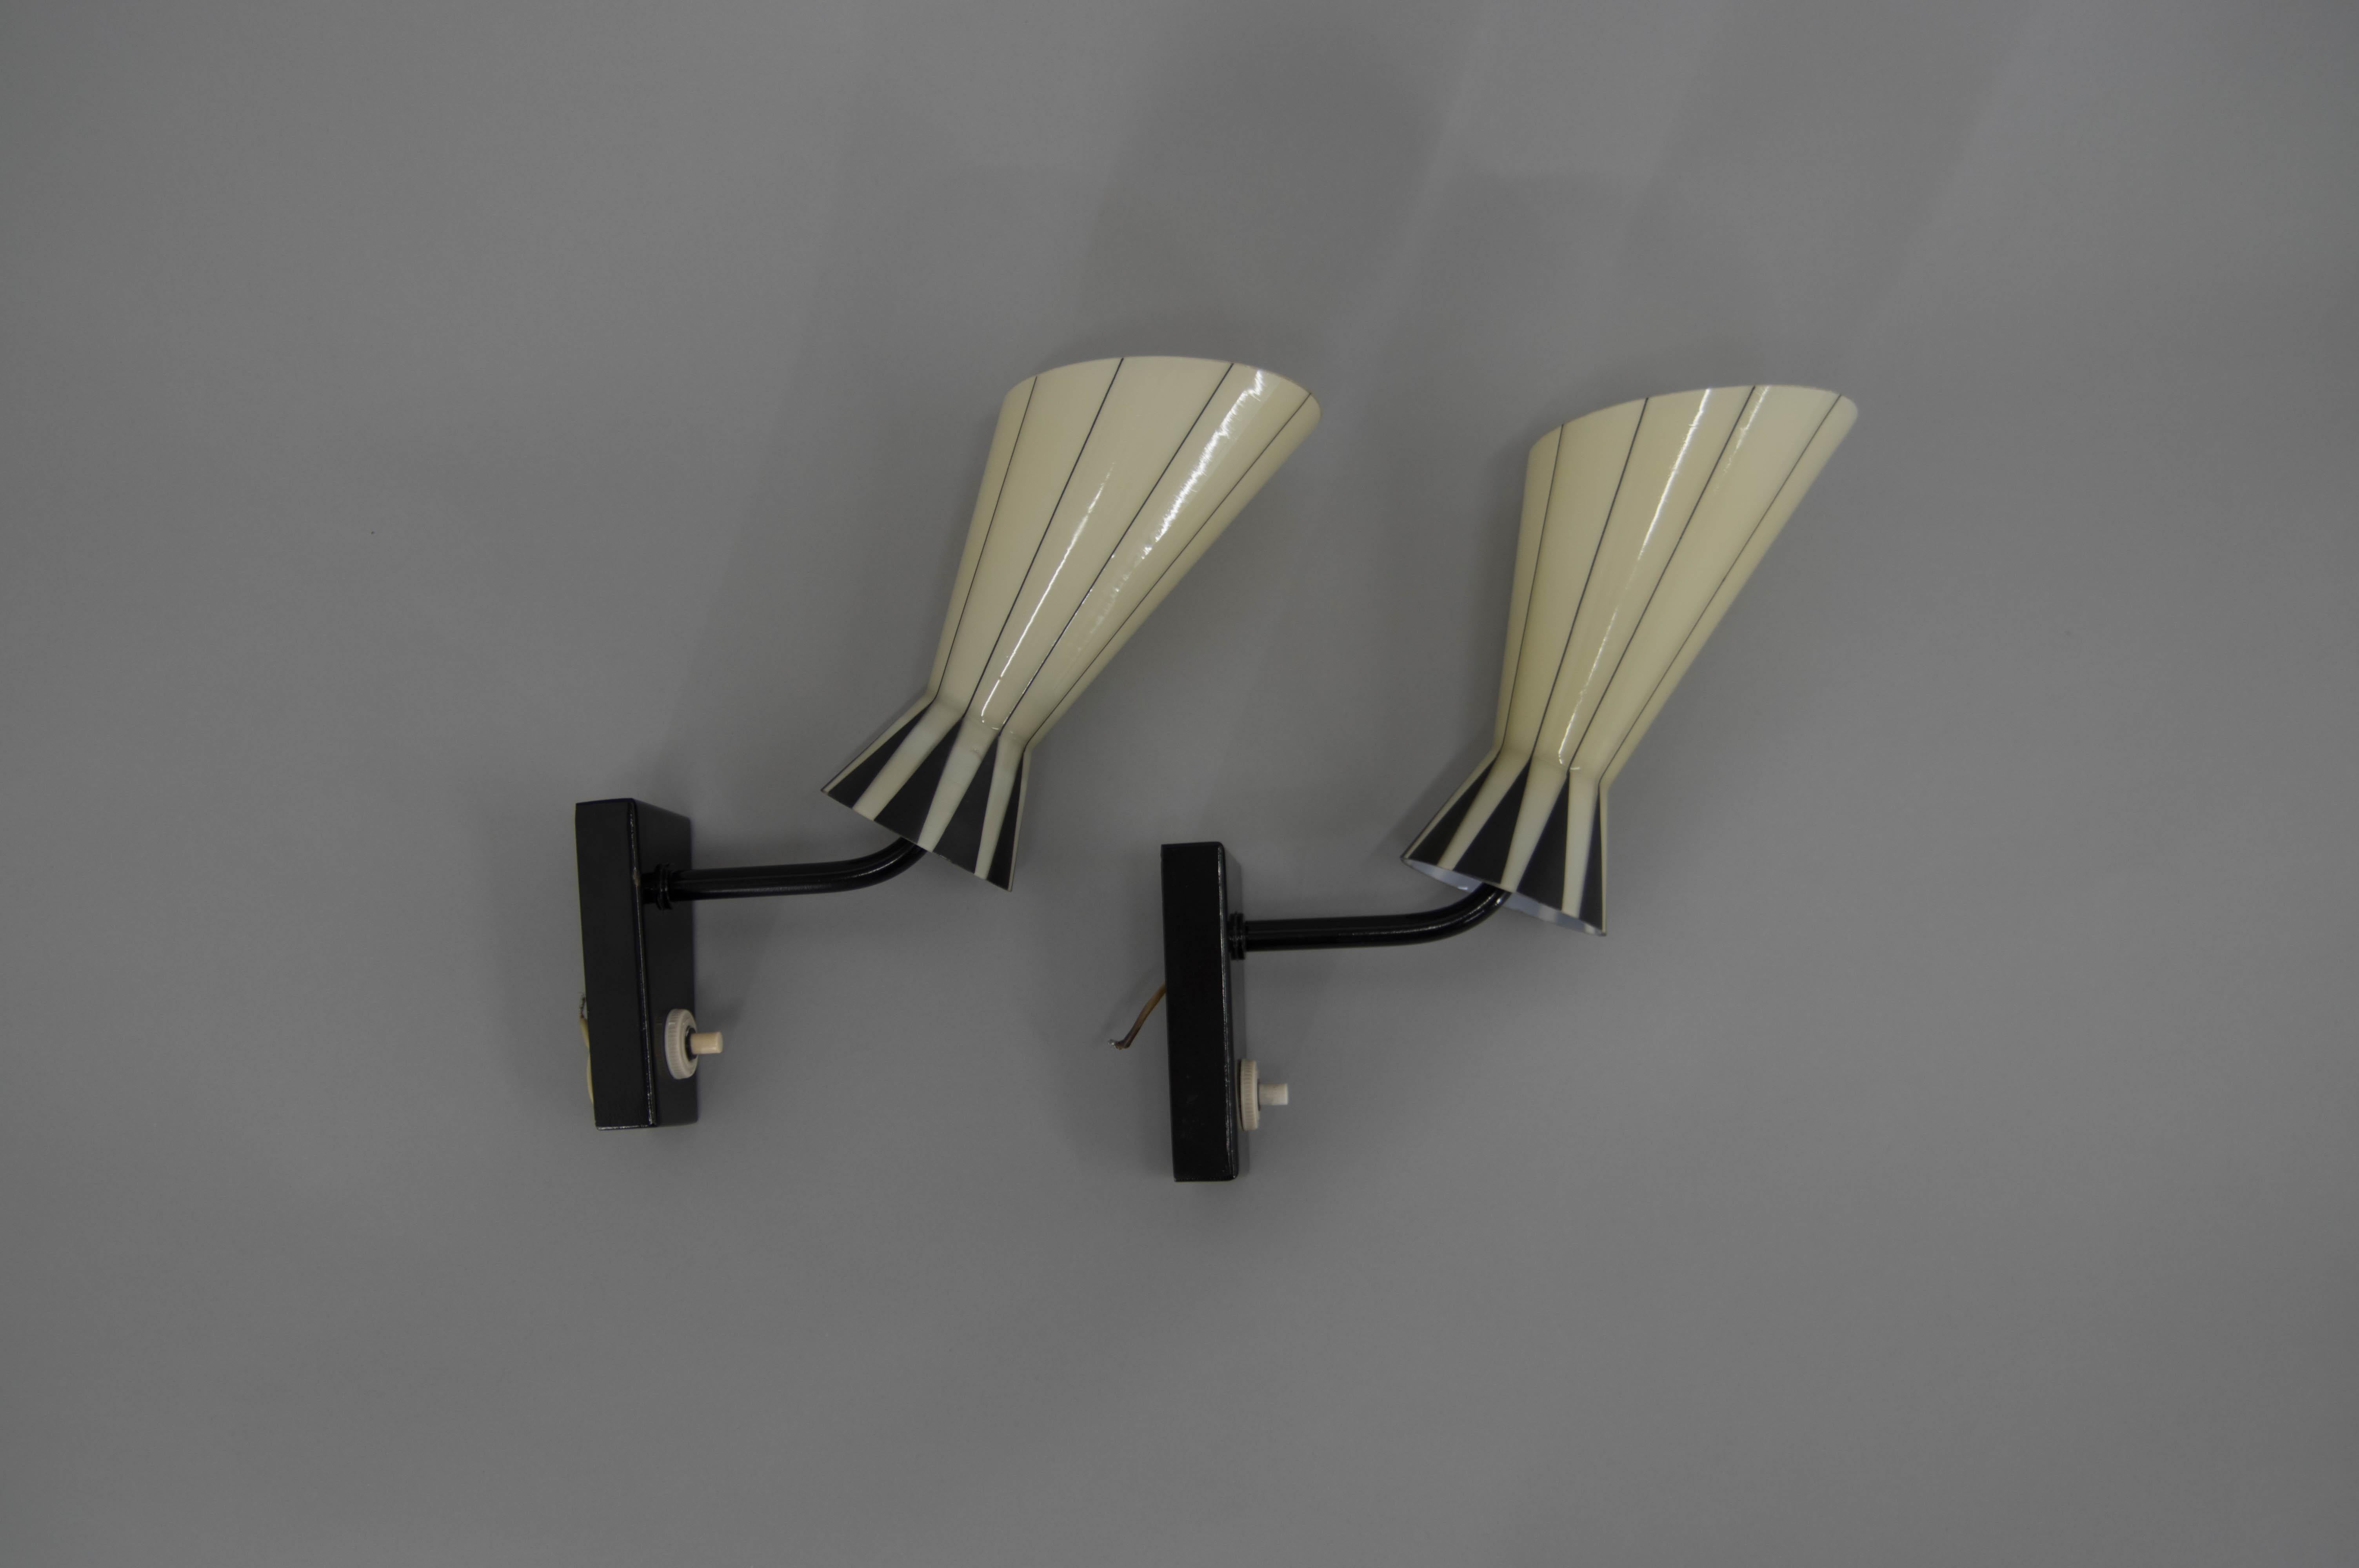 Mid-20th Century Art Deco Wall Lamps, Europe, 1960s For Sale